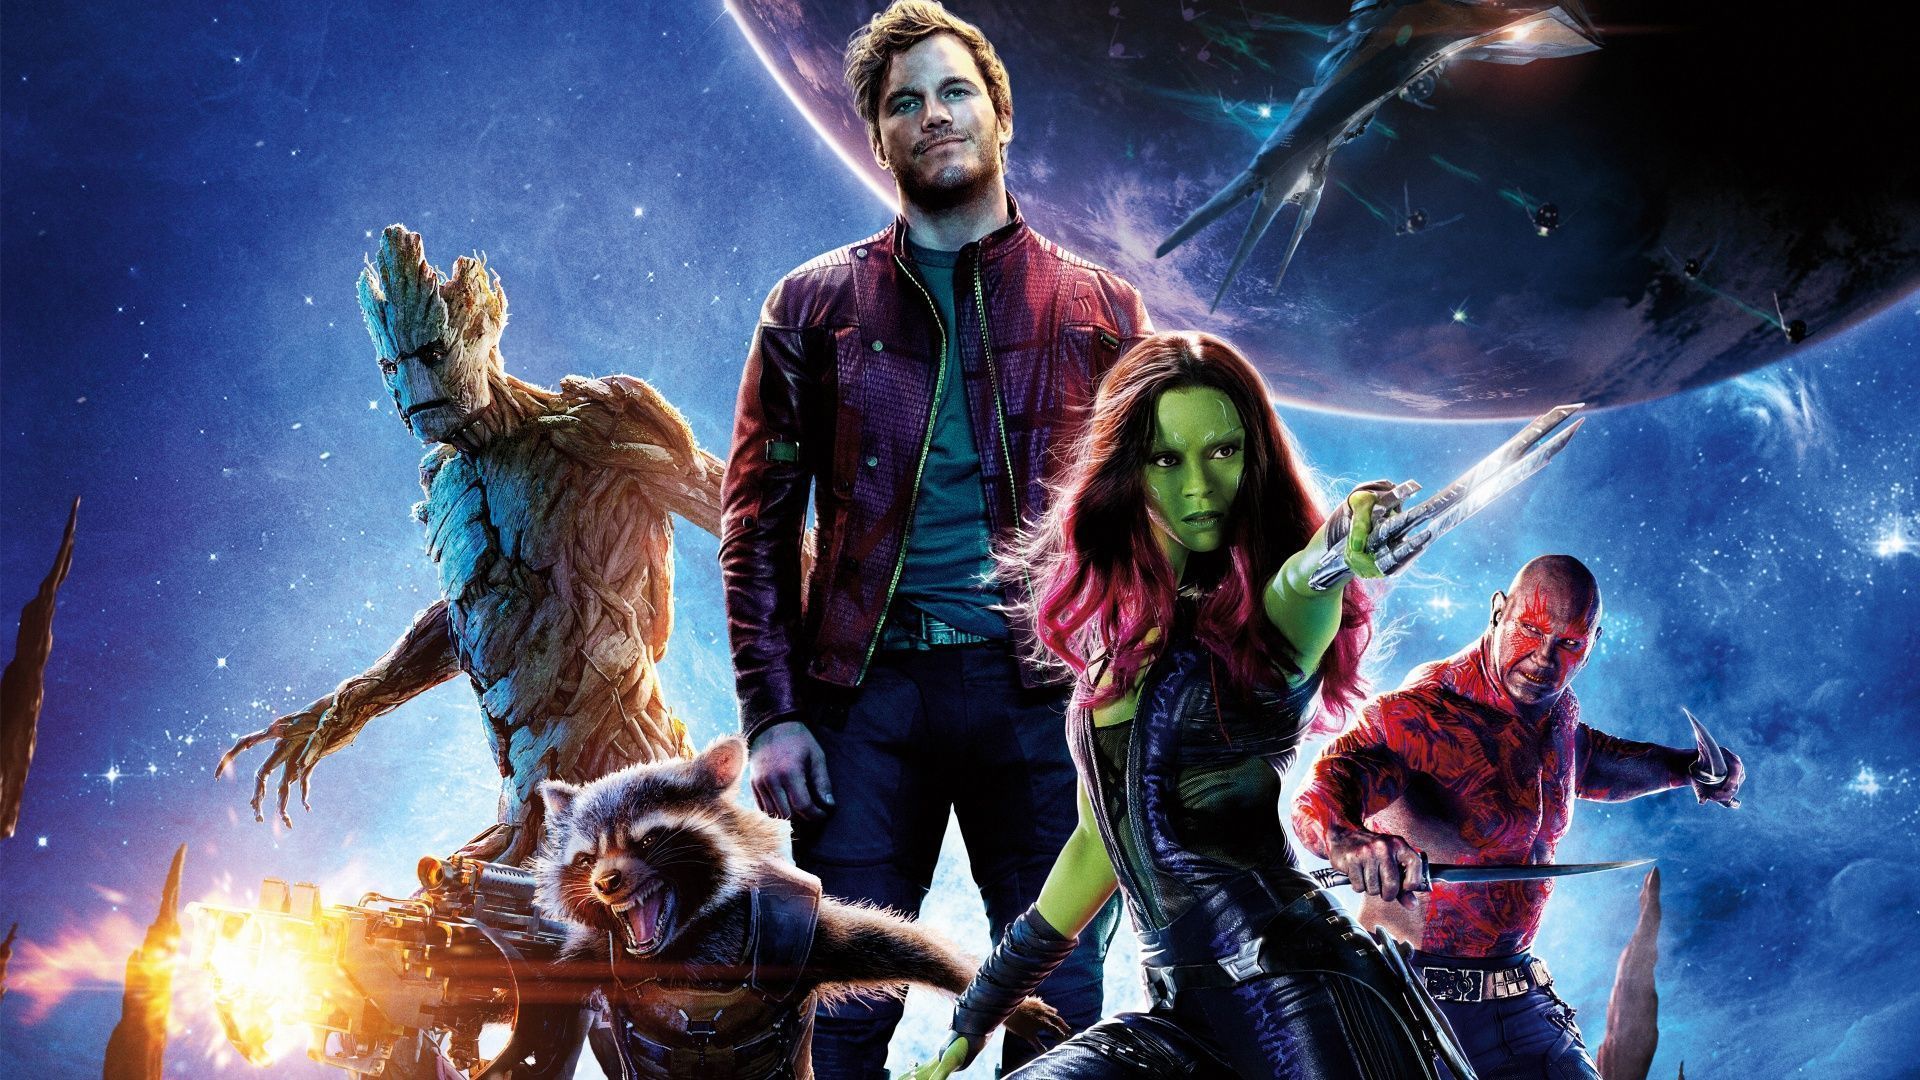 2014 Guardians of the Galaxy Wallpapers | HD Wallpapers